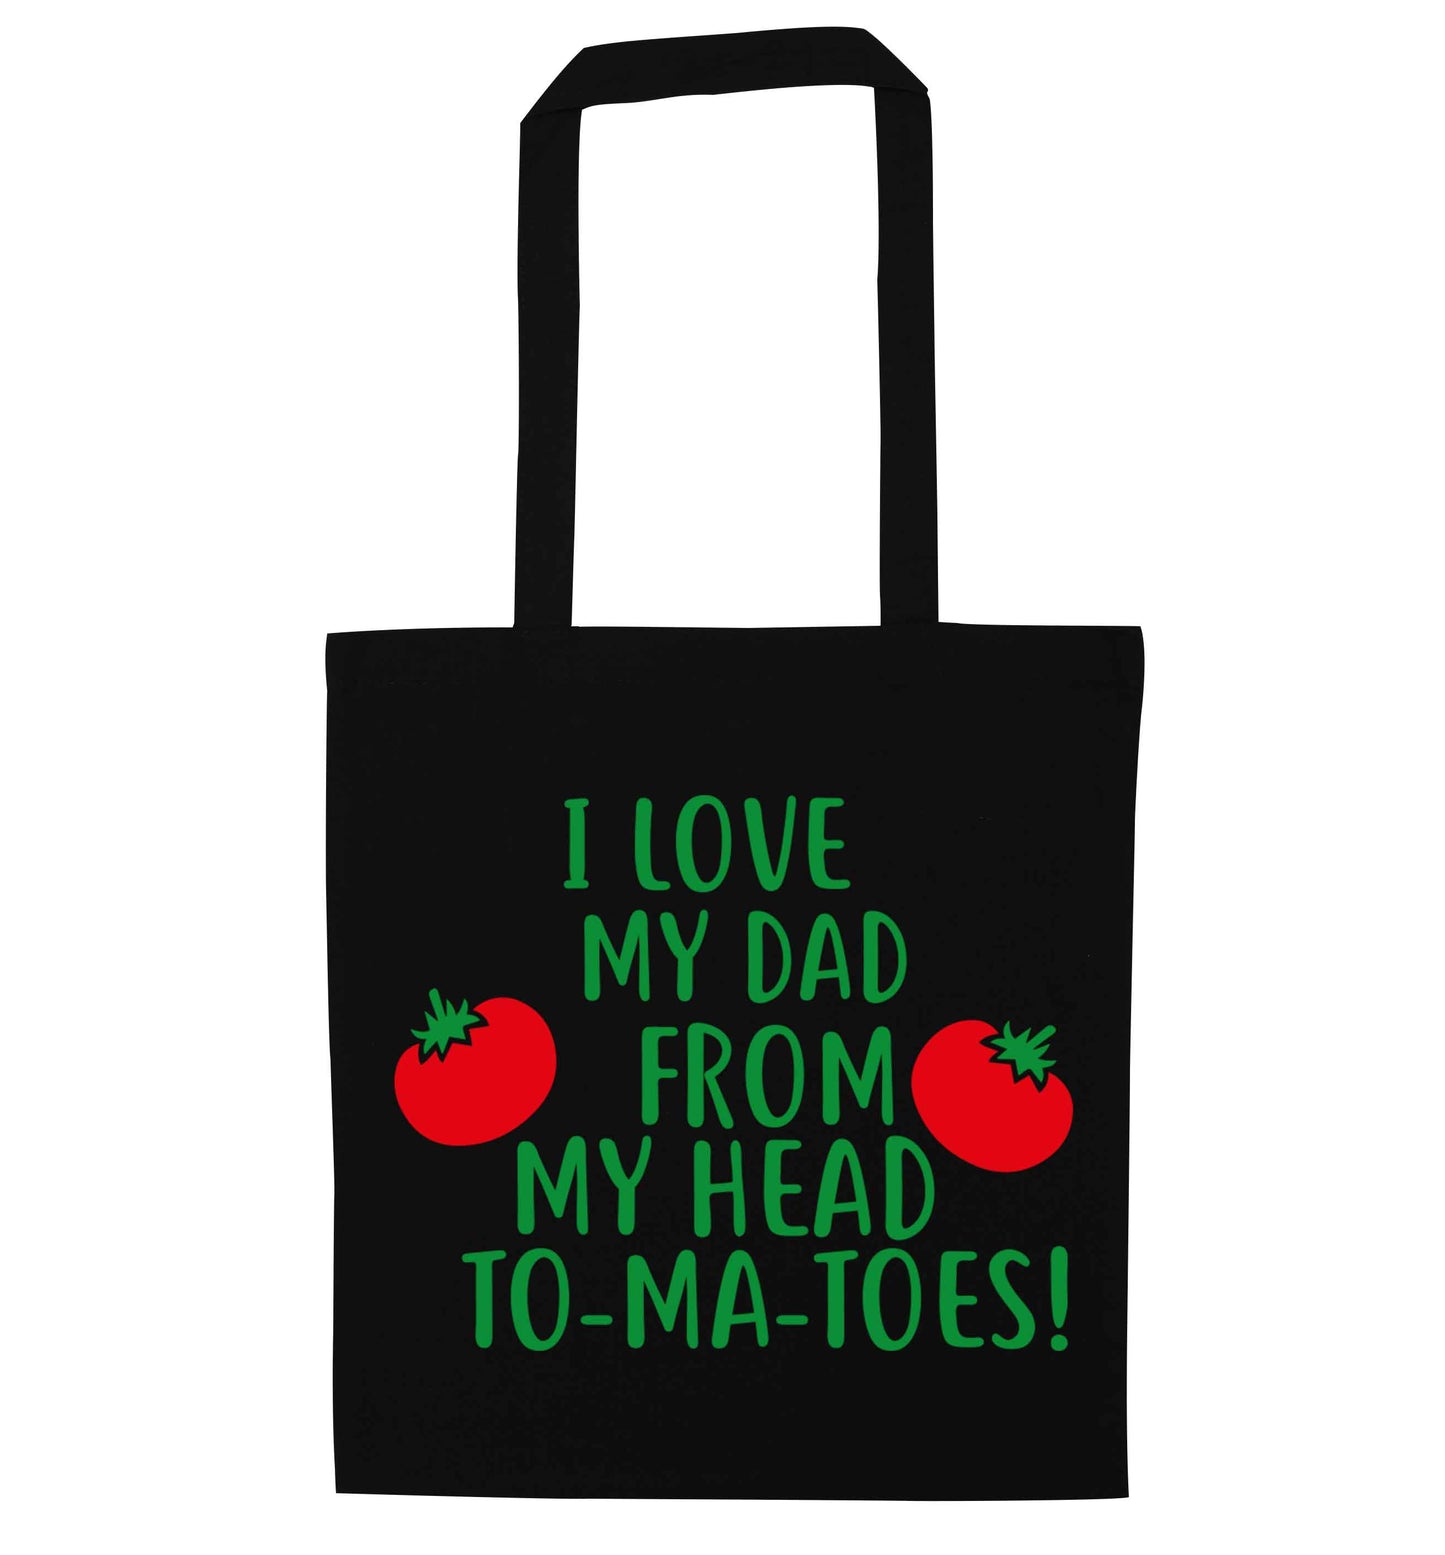 I love my dad from my head to-ma-toes black tote bag